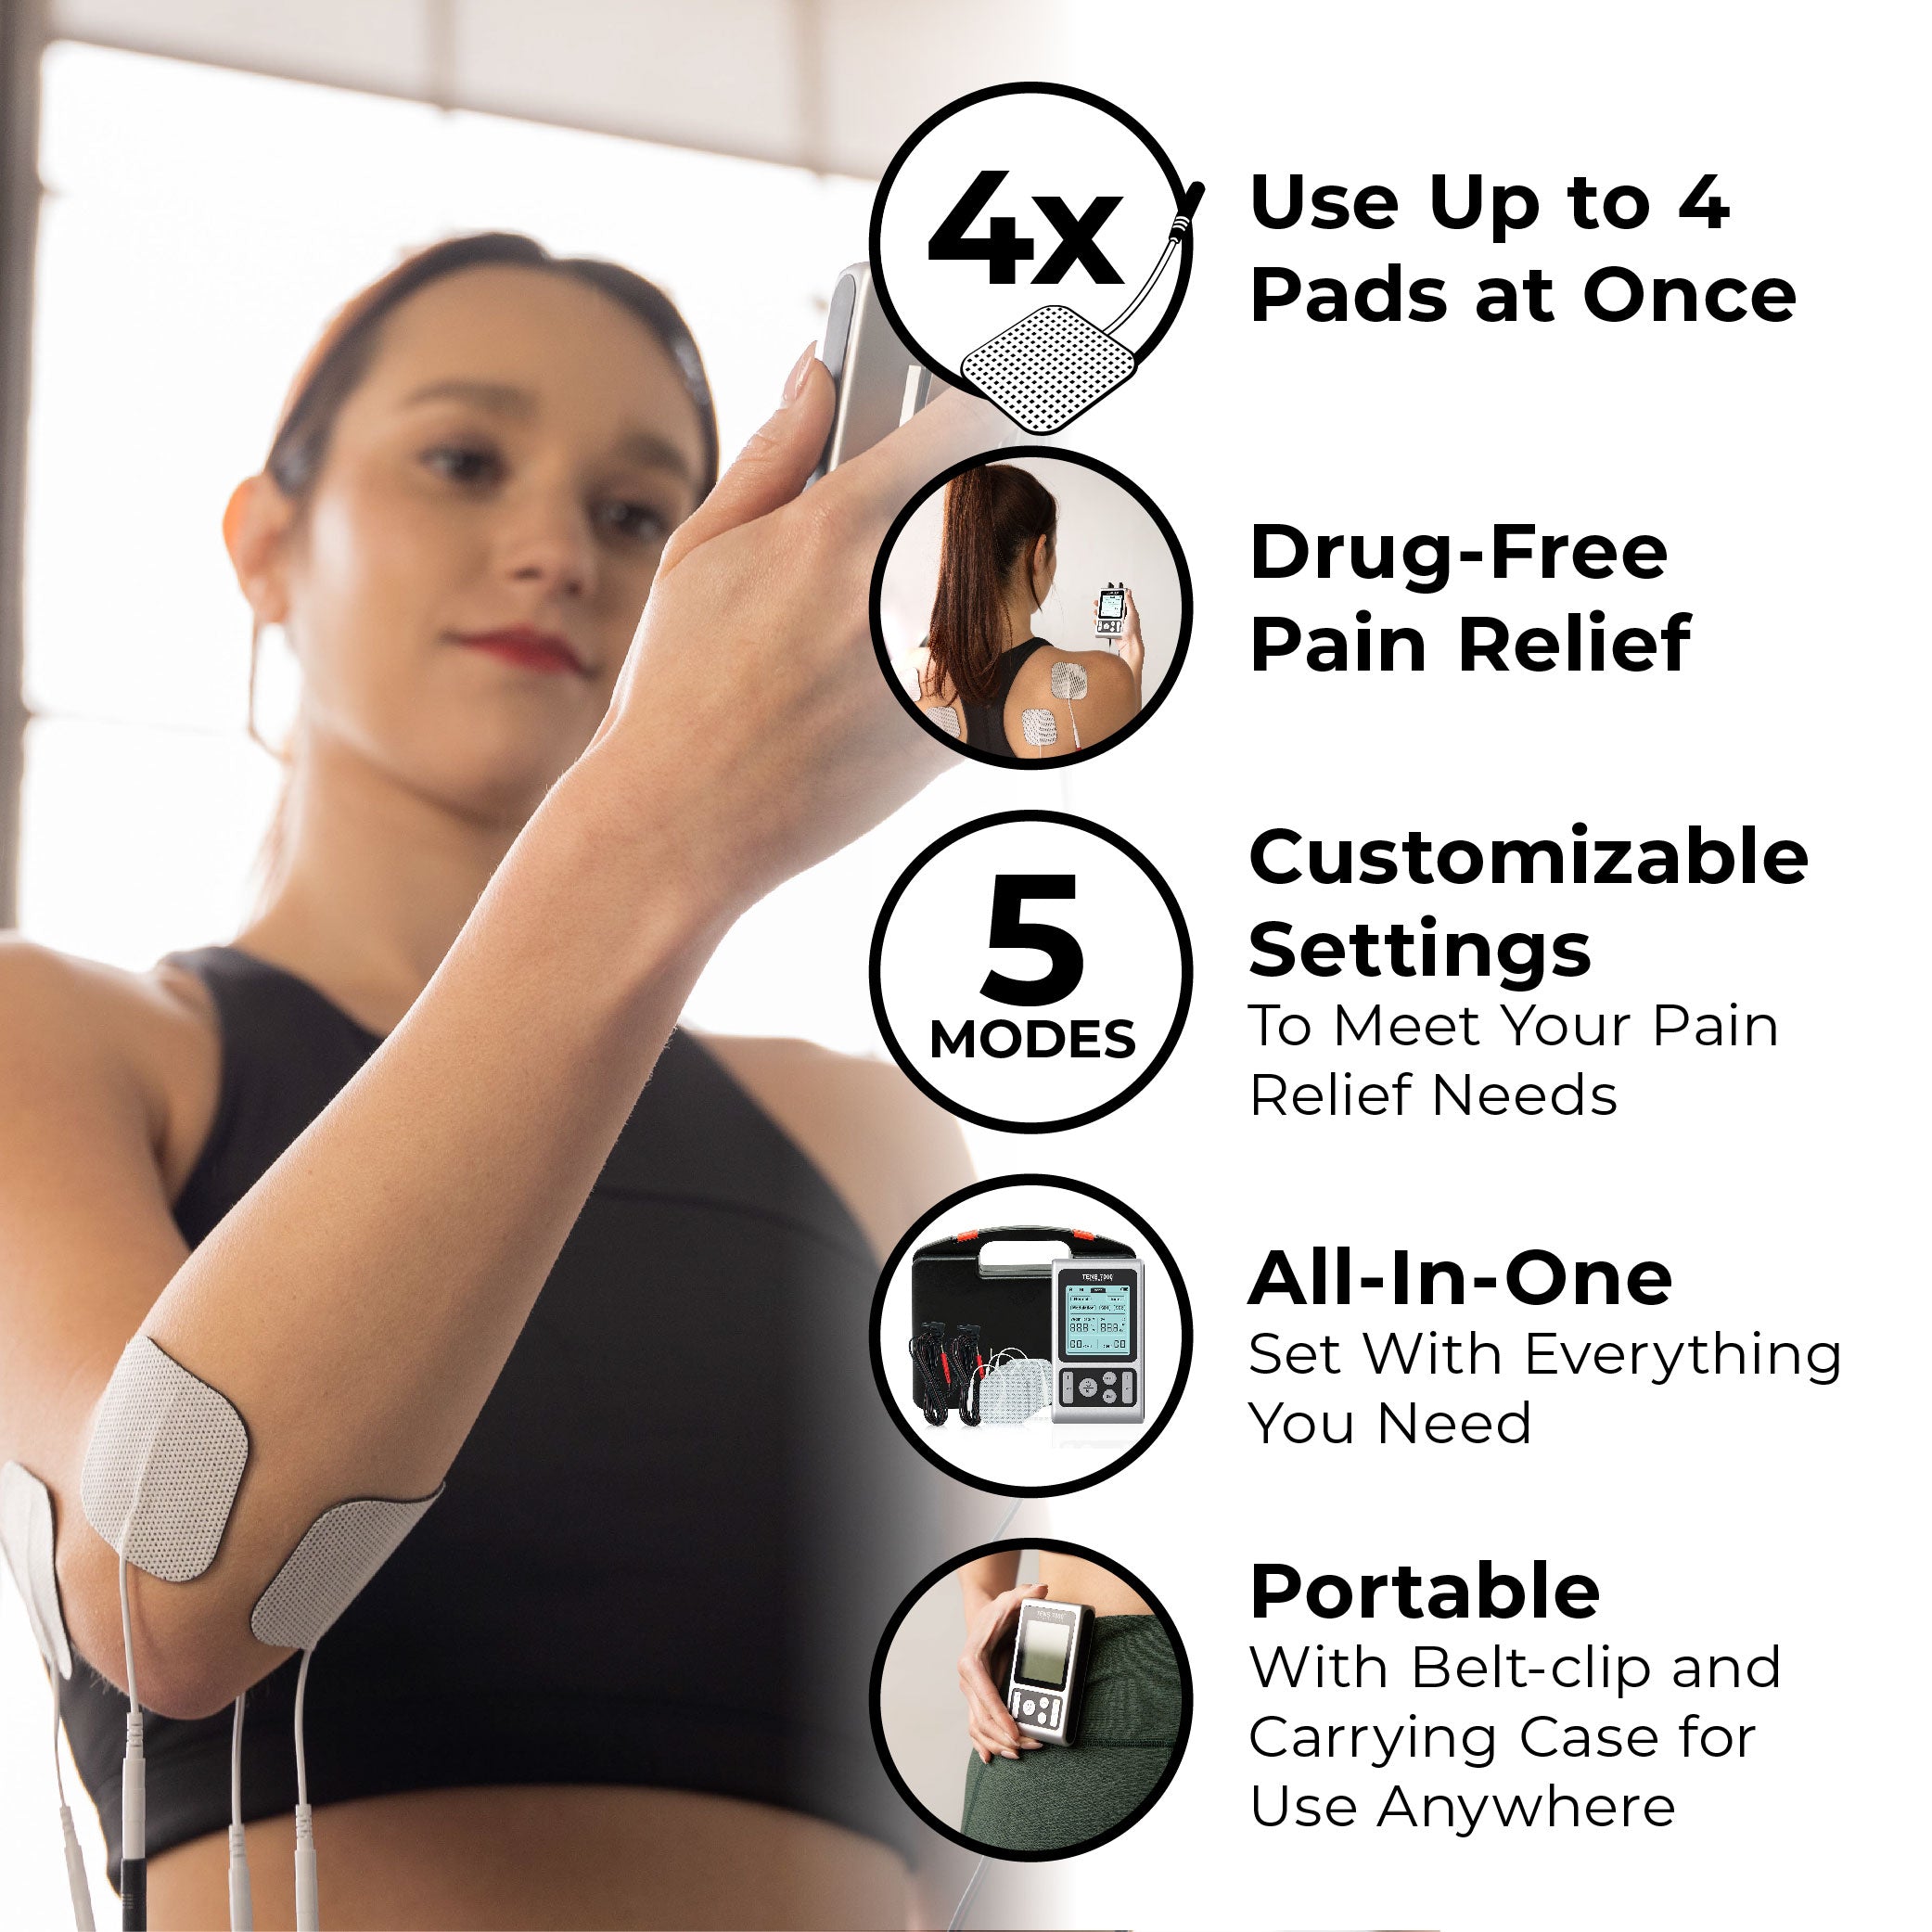 TENS 7000 Rechargeable TENS Unit Muscle Stimulator and Pain Relief Device -  Advanced TENS Machine for Effective Back Pain Relief, Nerve Pain Relief,  Muscle Pain Relief